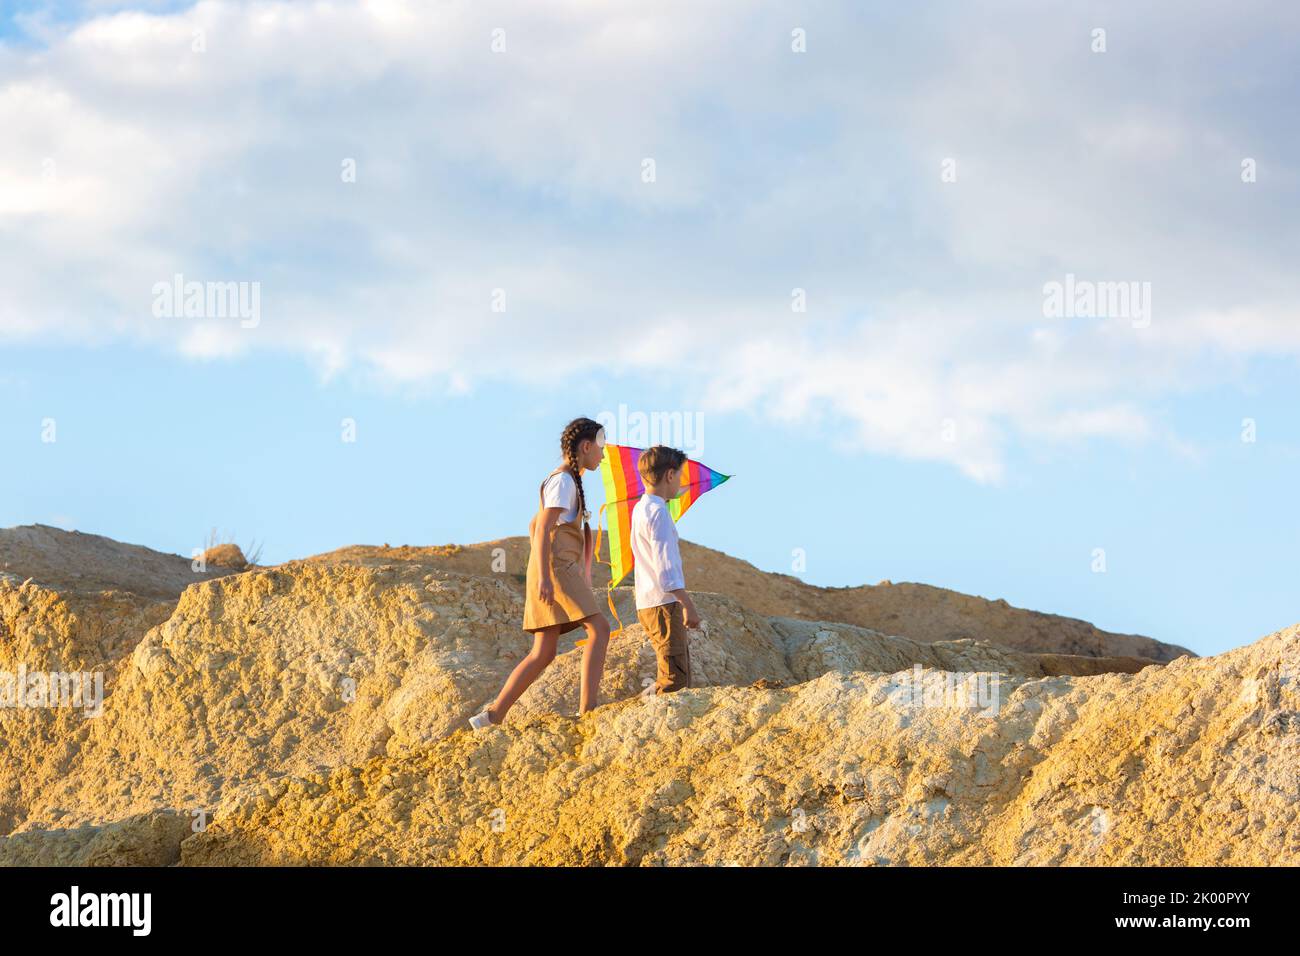 Children boy and girl with kite in their hands climb a high mountain. Stock Photo